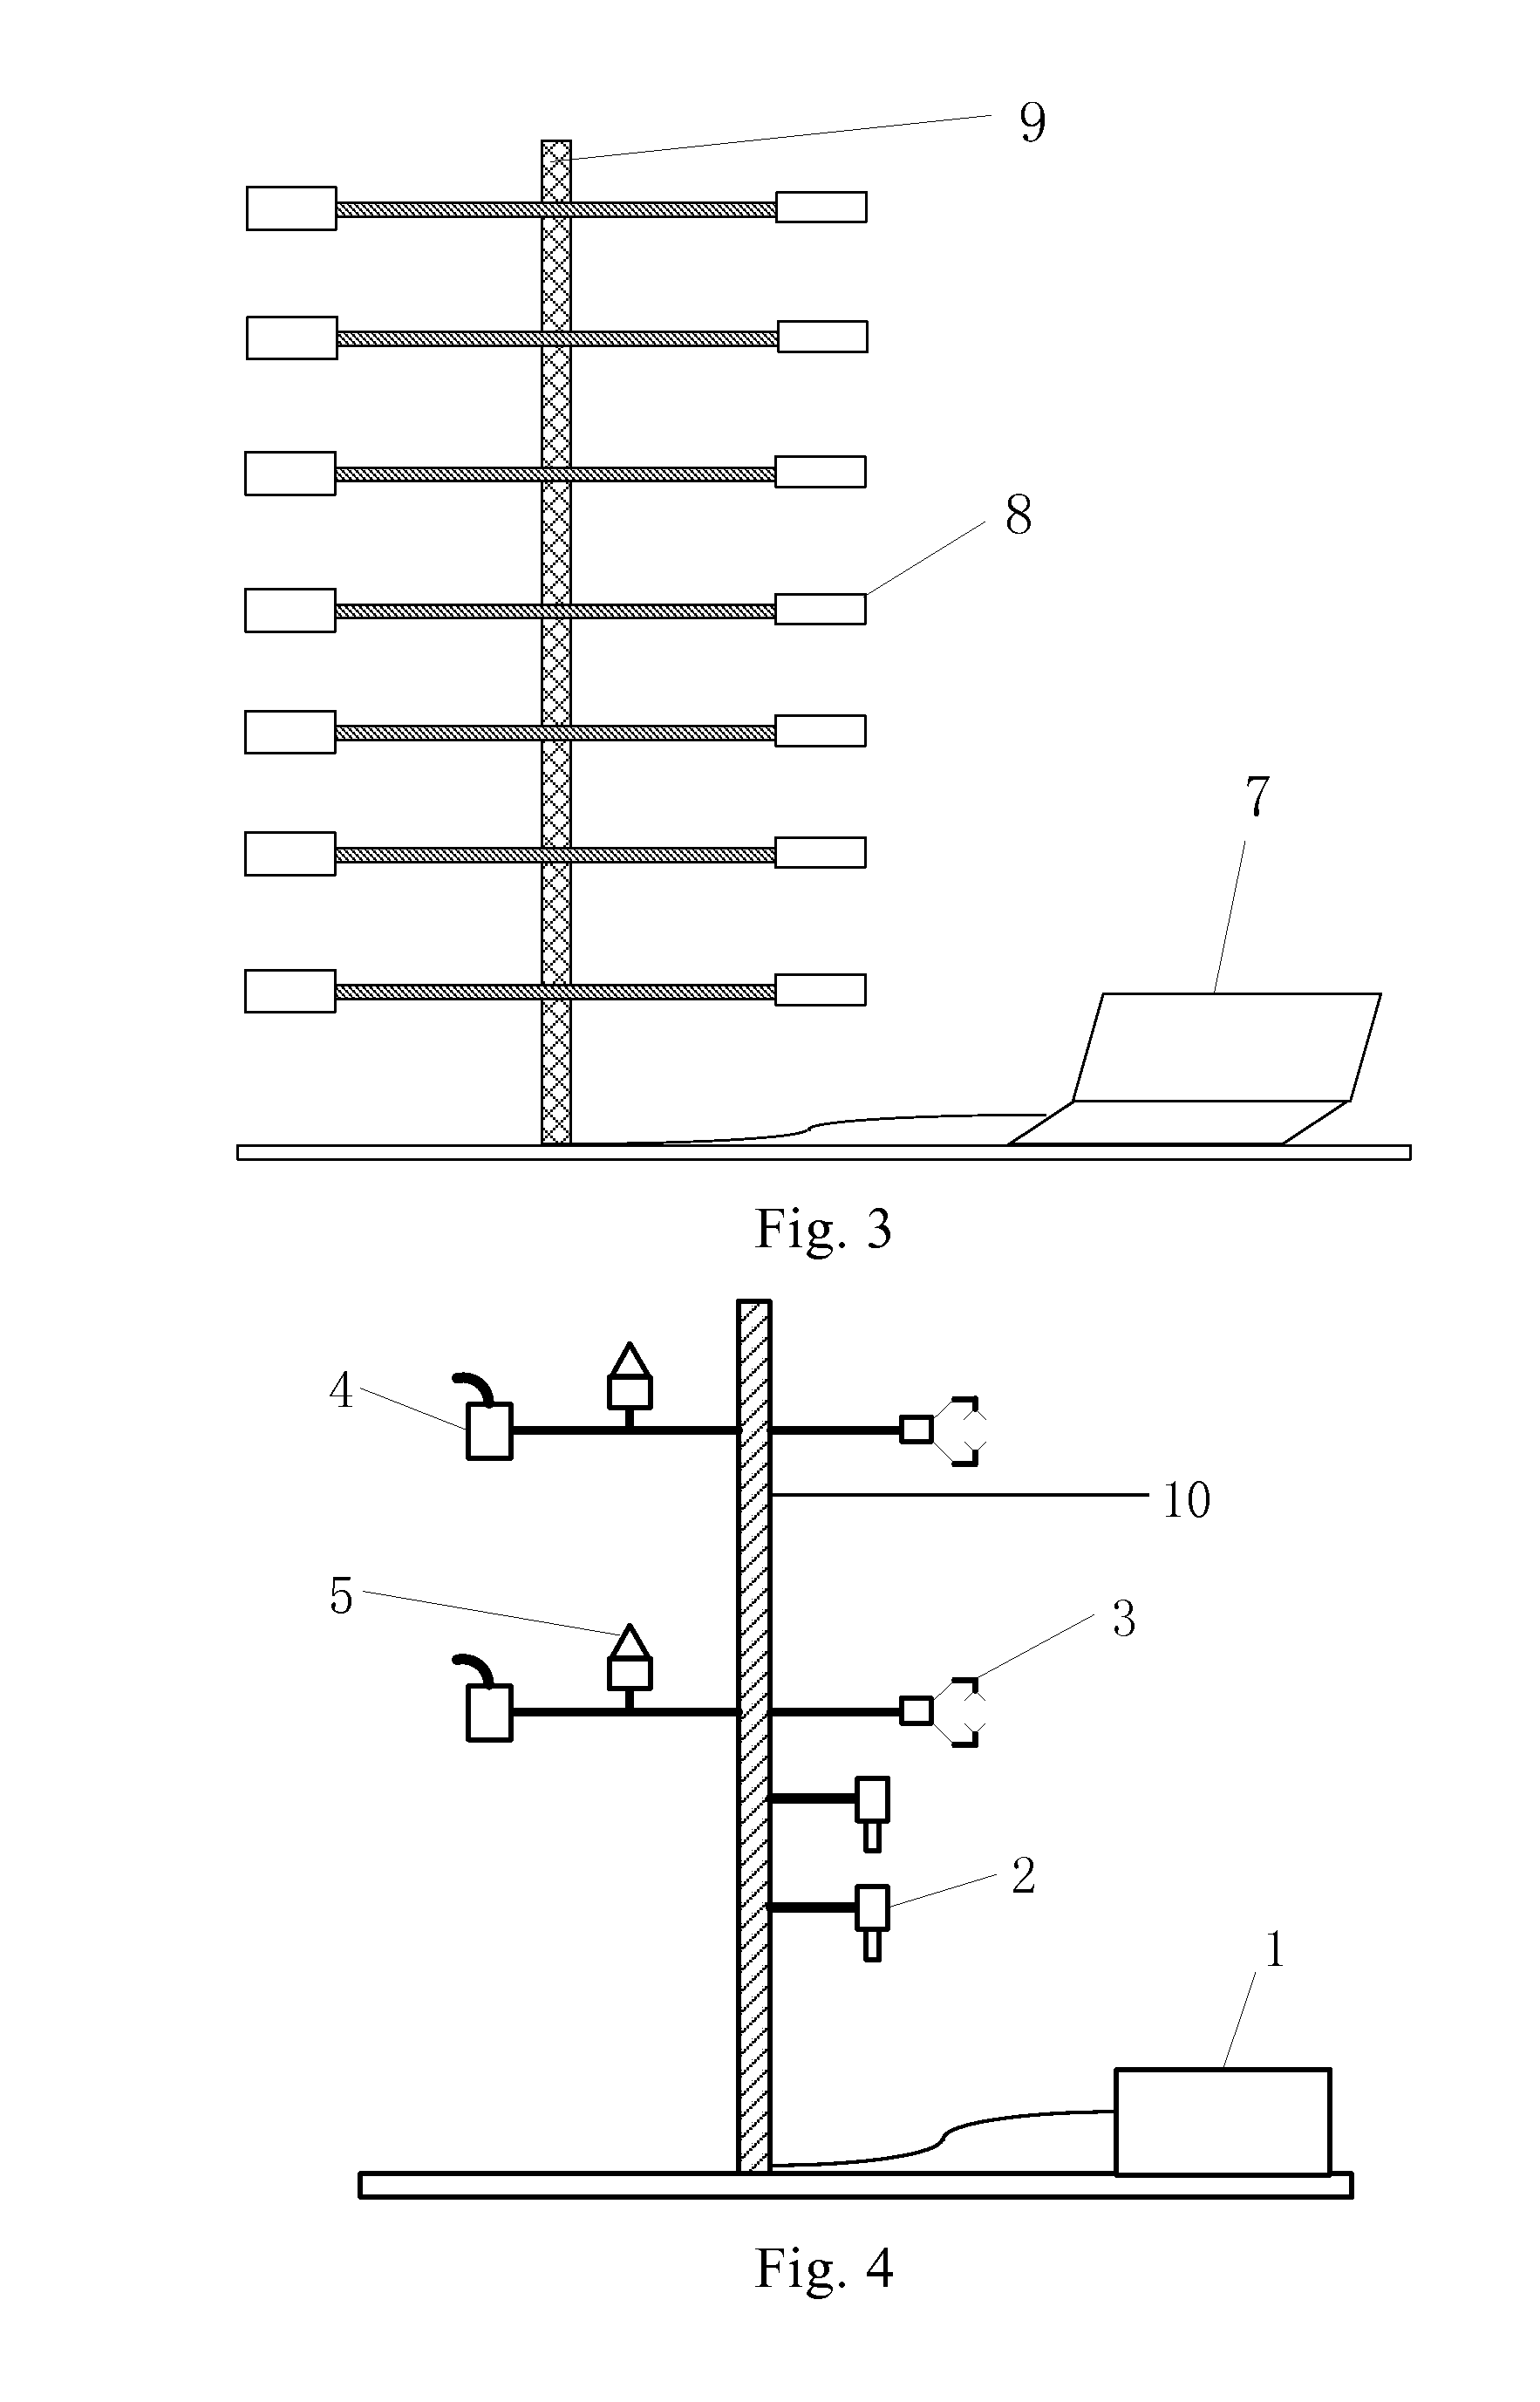 Monitoring system for turbulence of atmospheric boundary layer under wind drift sand flow or sand dust storm environment